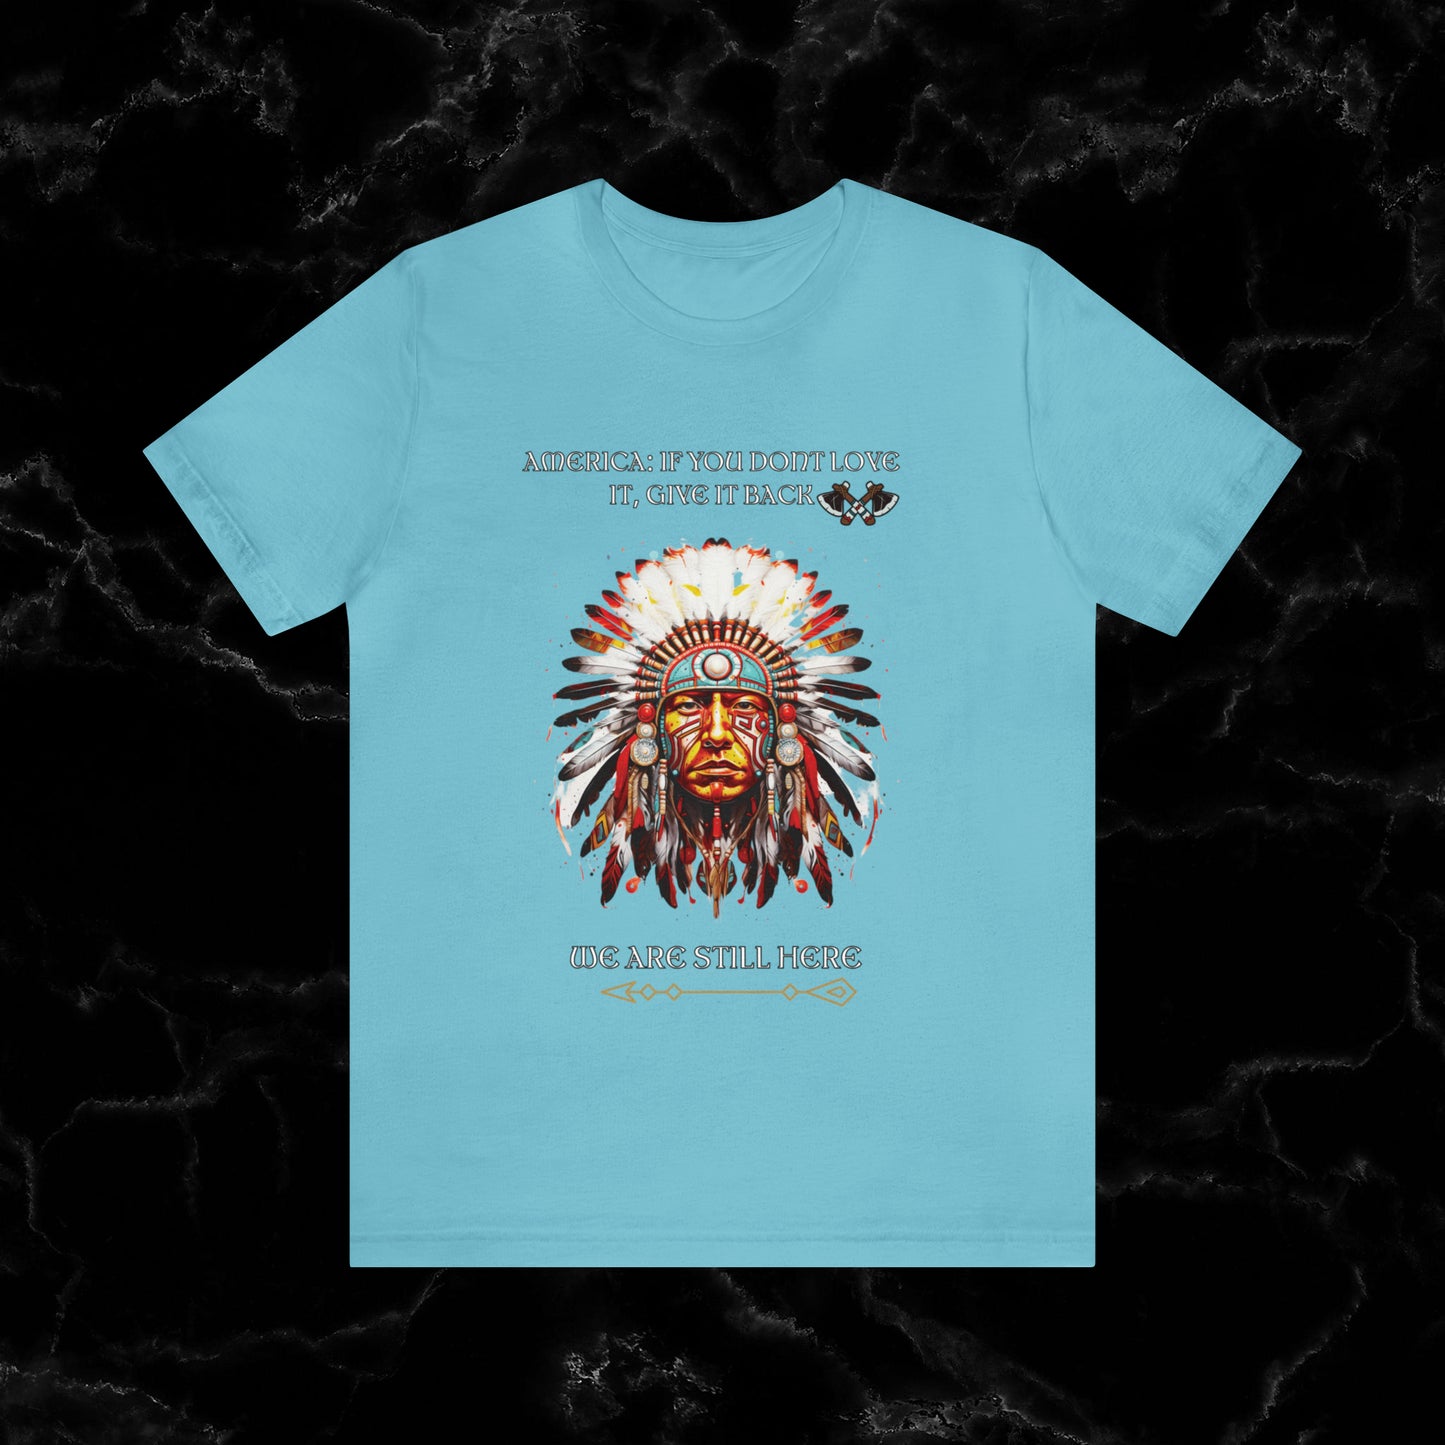 America Love it Or Give It Back Vintage T-Shirt - Indigenous Native Shirt T-Shirt Turquoise S 